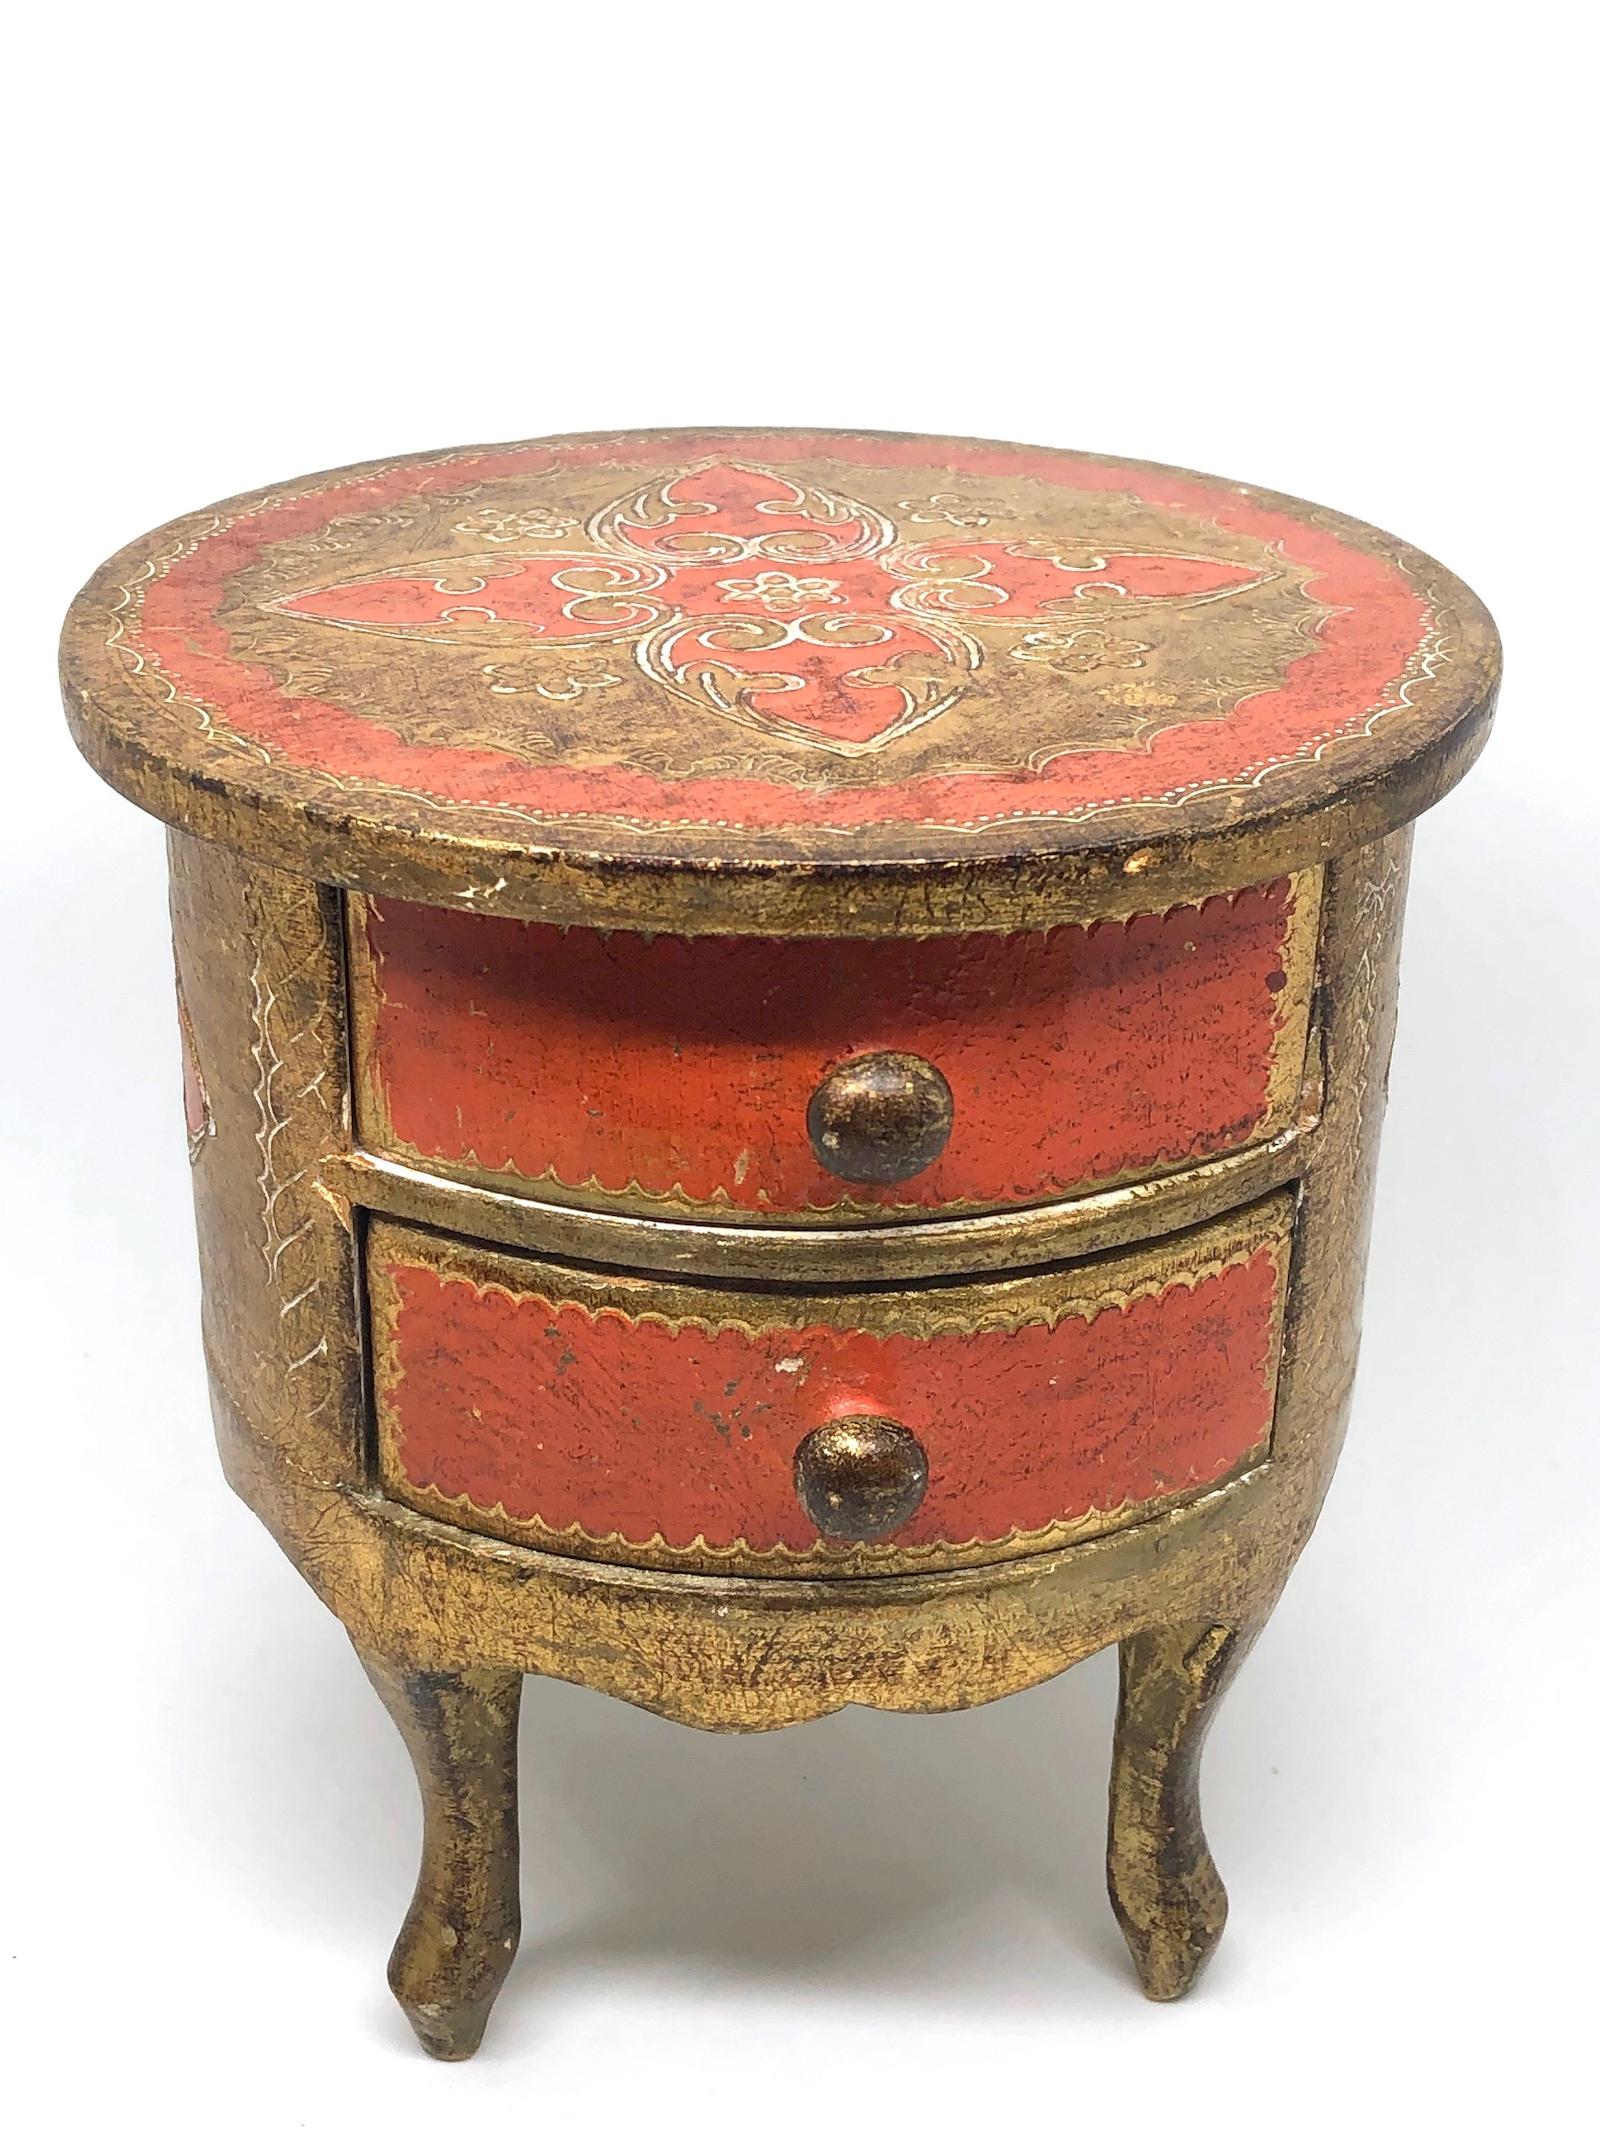 Offered is an absolutely stunning, 1950s Italian giltwood jewelry box in the design of a chest of drawers. Minor patina and paint lost gives this piece a classy statement.